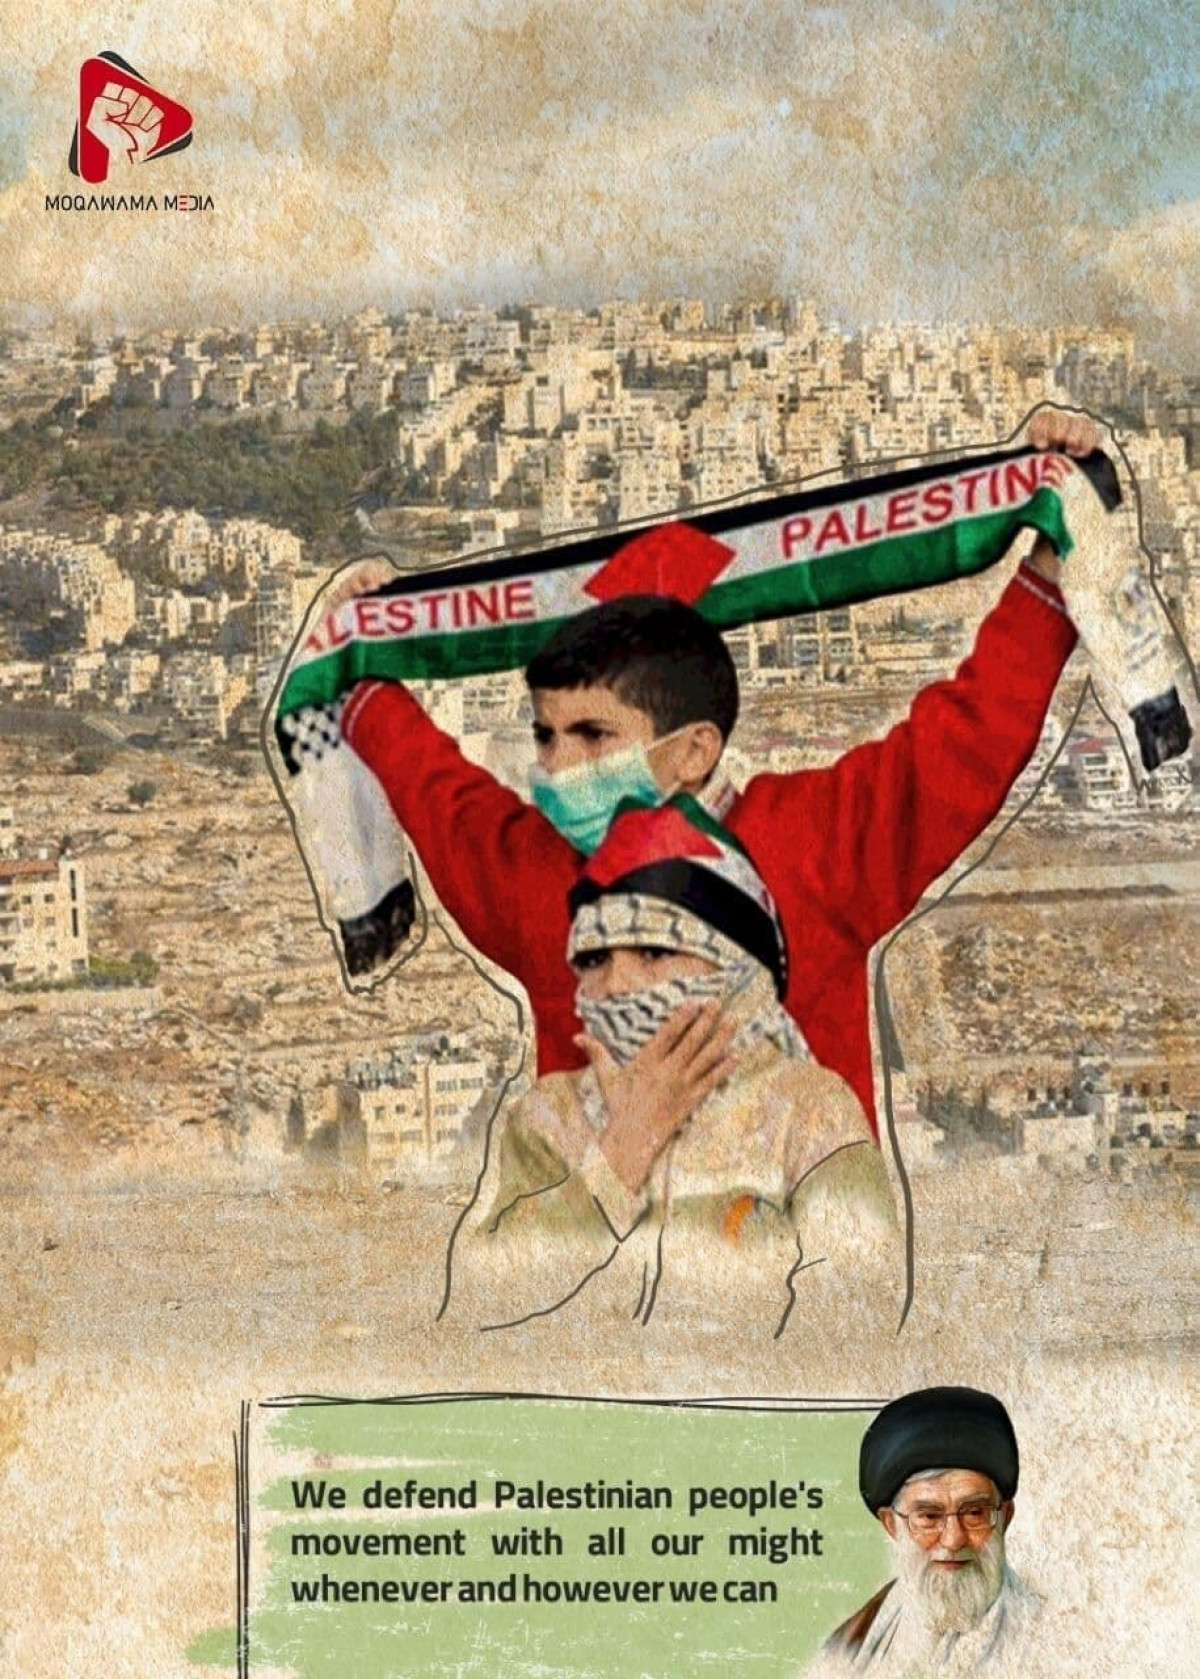 We defend Palestinian people's movement with all our might  whenever and however we can